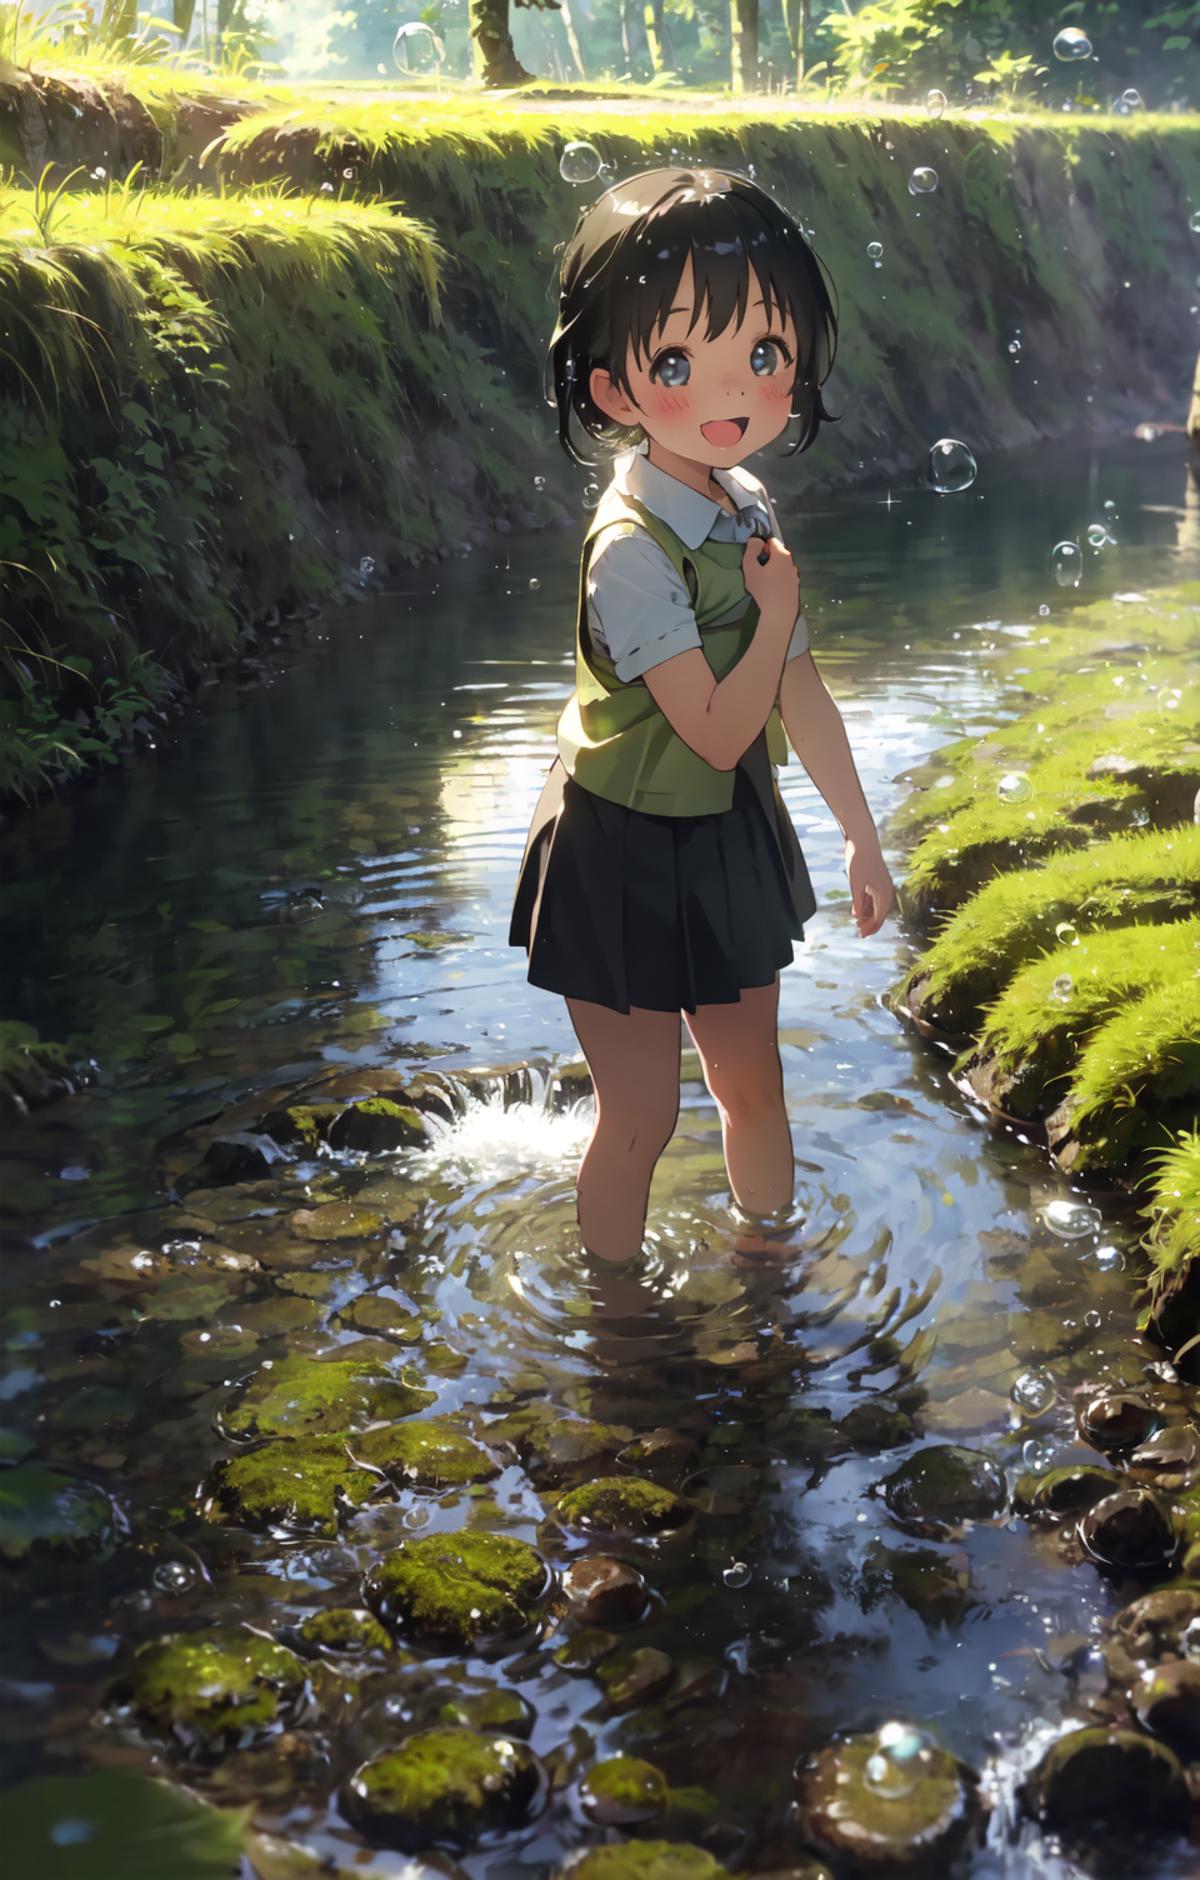 A young girl wearing a white shirt and a green vest is standing in a stream of water.